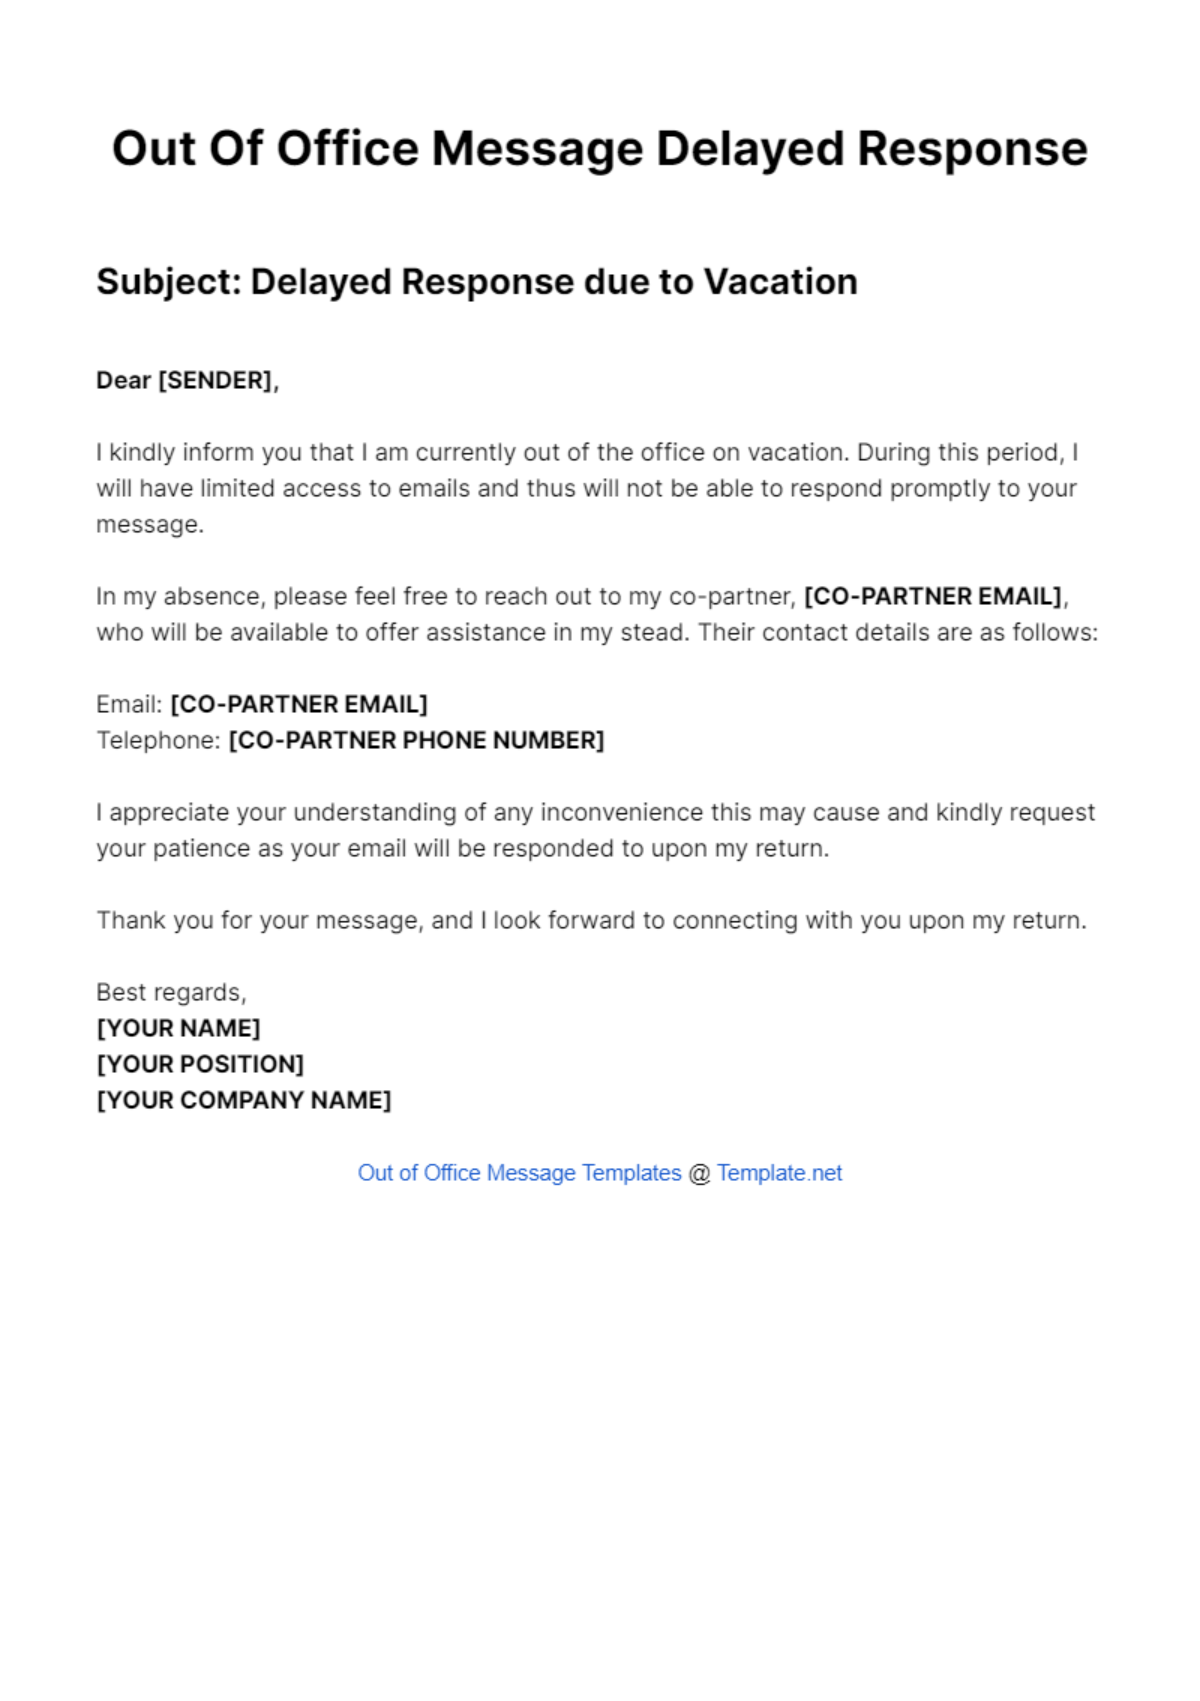 Out Of Office Message Delayed Response Template